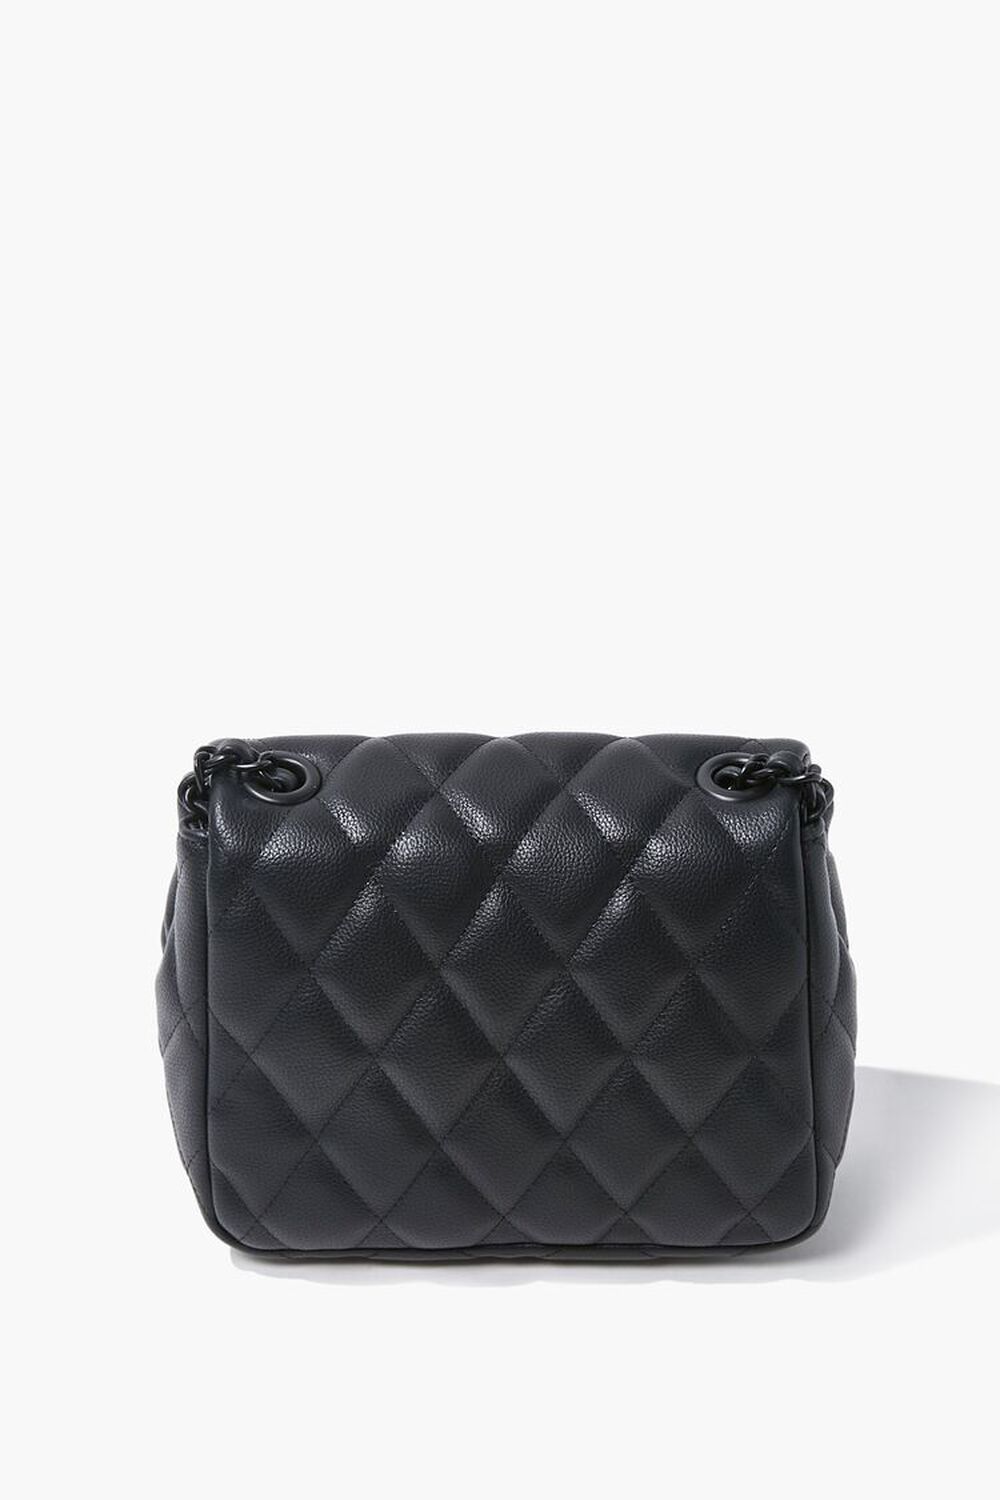 BLACK Quilted Square Crossbody Bag, image 3